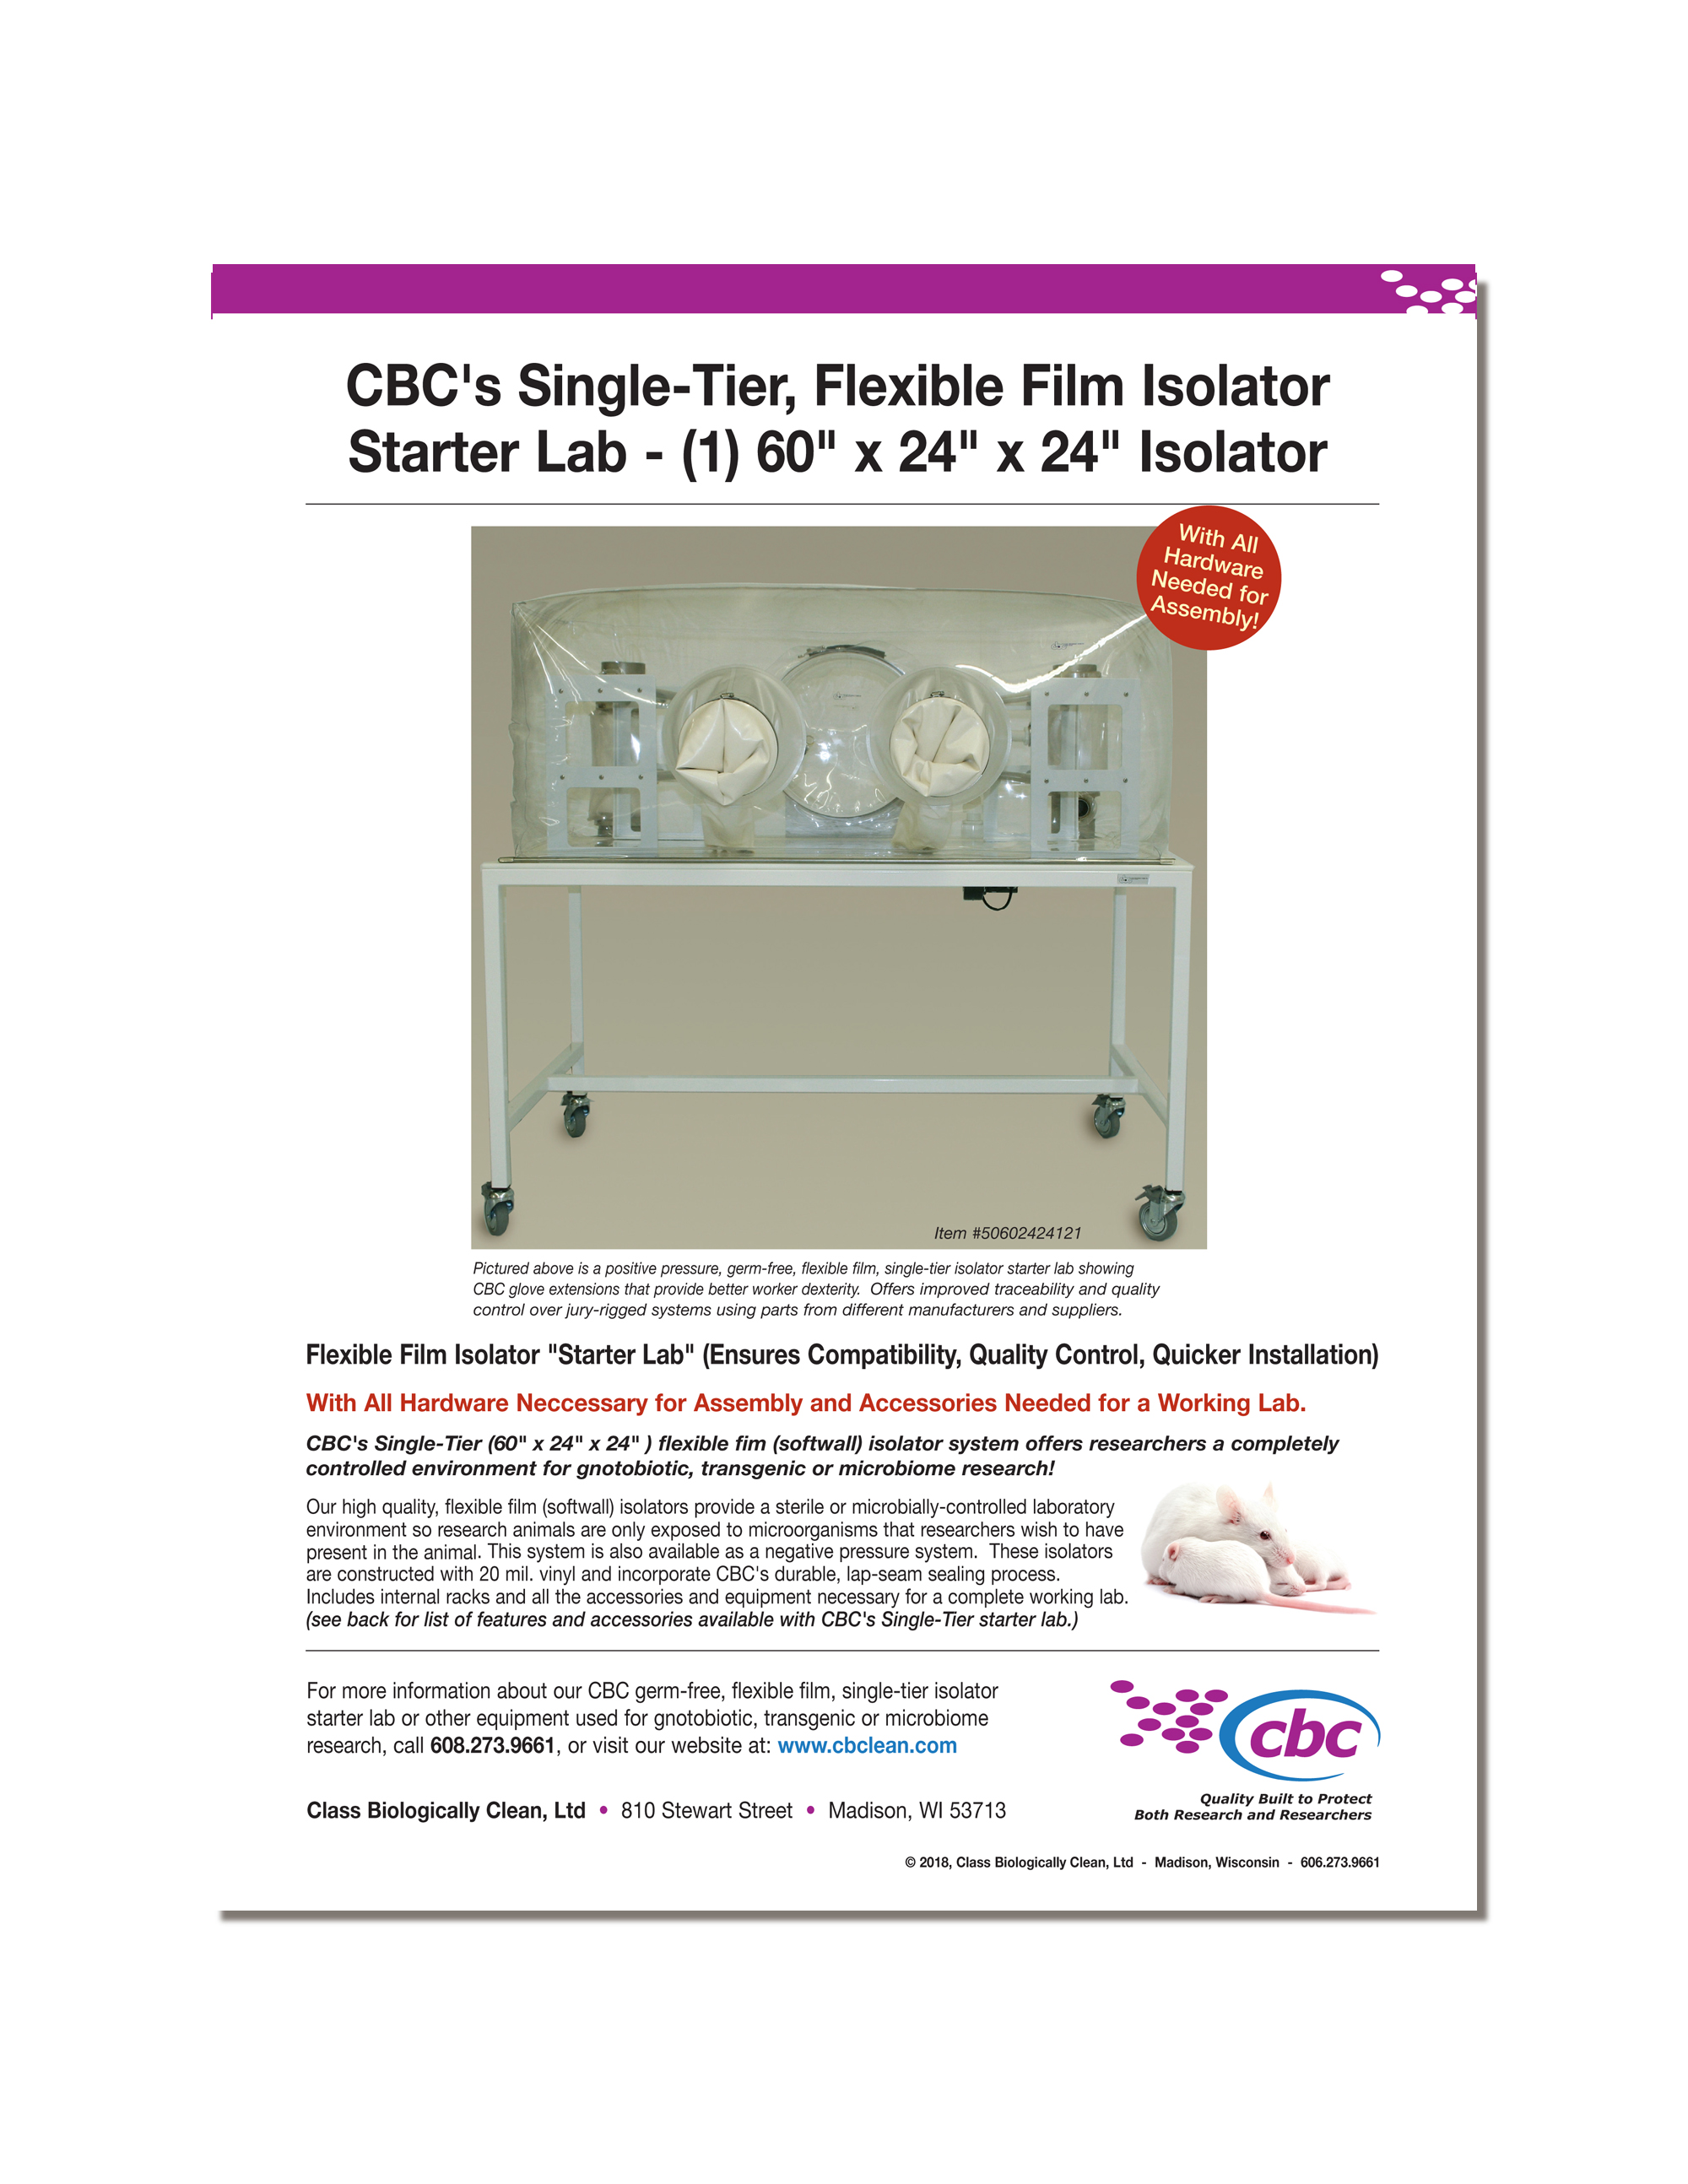 The CBC single-tier flexible film starter lab comes with all the lab hardware and accessories needed for researchers to install a fully functional germ free lab that offers complete environmental control for gnotobiotic, microbiome and other research using mice or other rodents. Click here to download flyer.